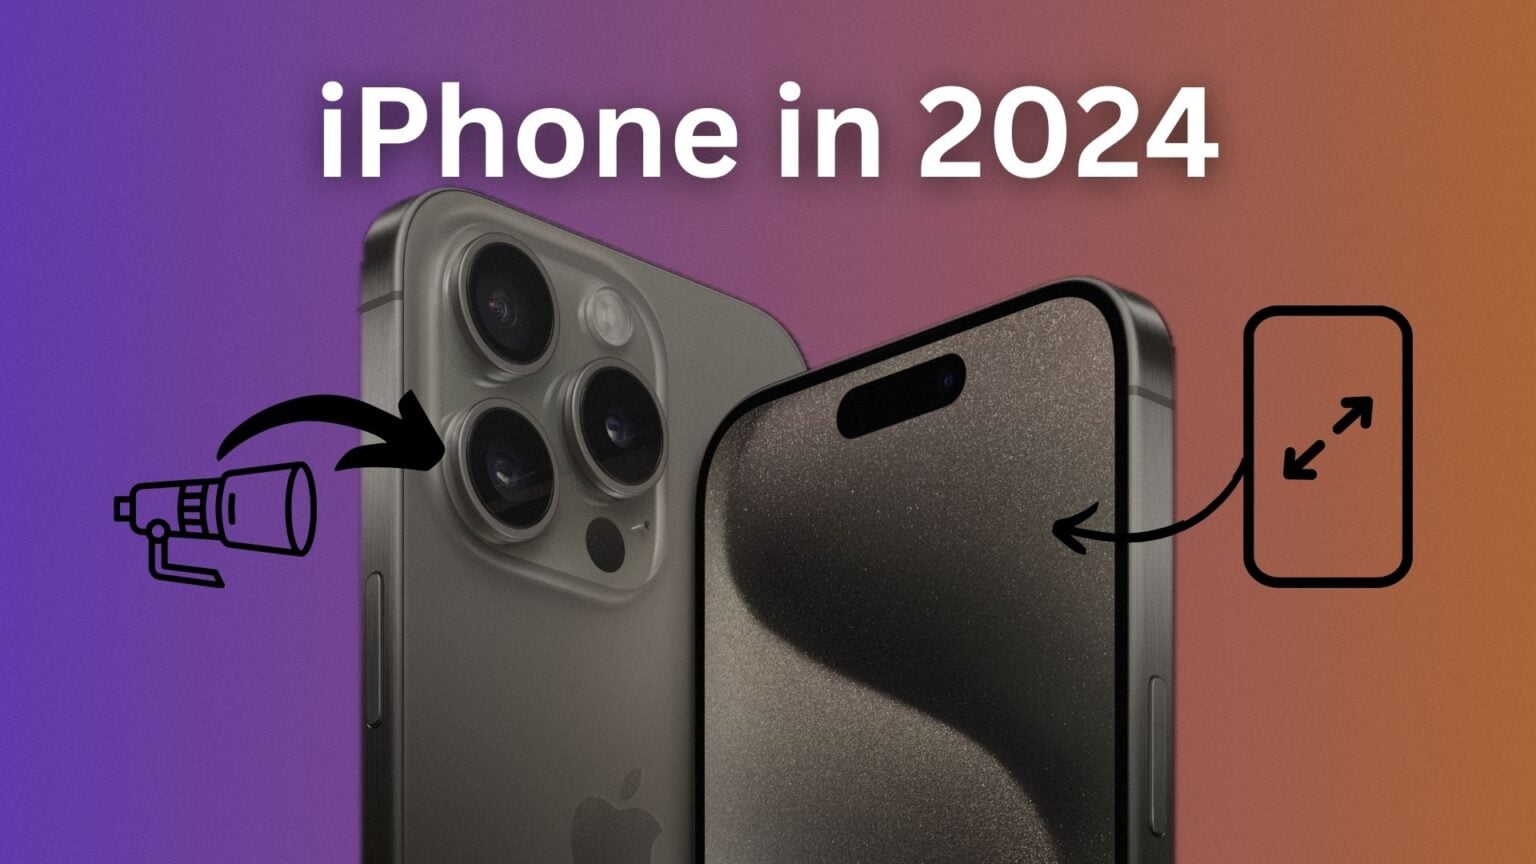 What to expect from iPhone in 2024